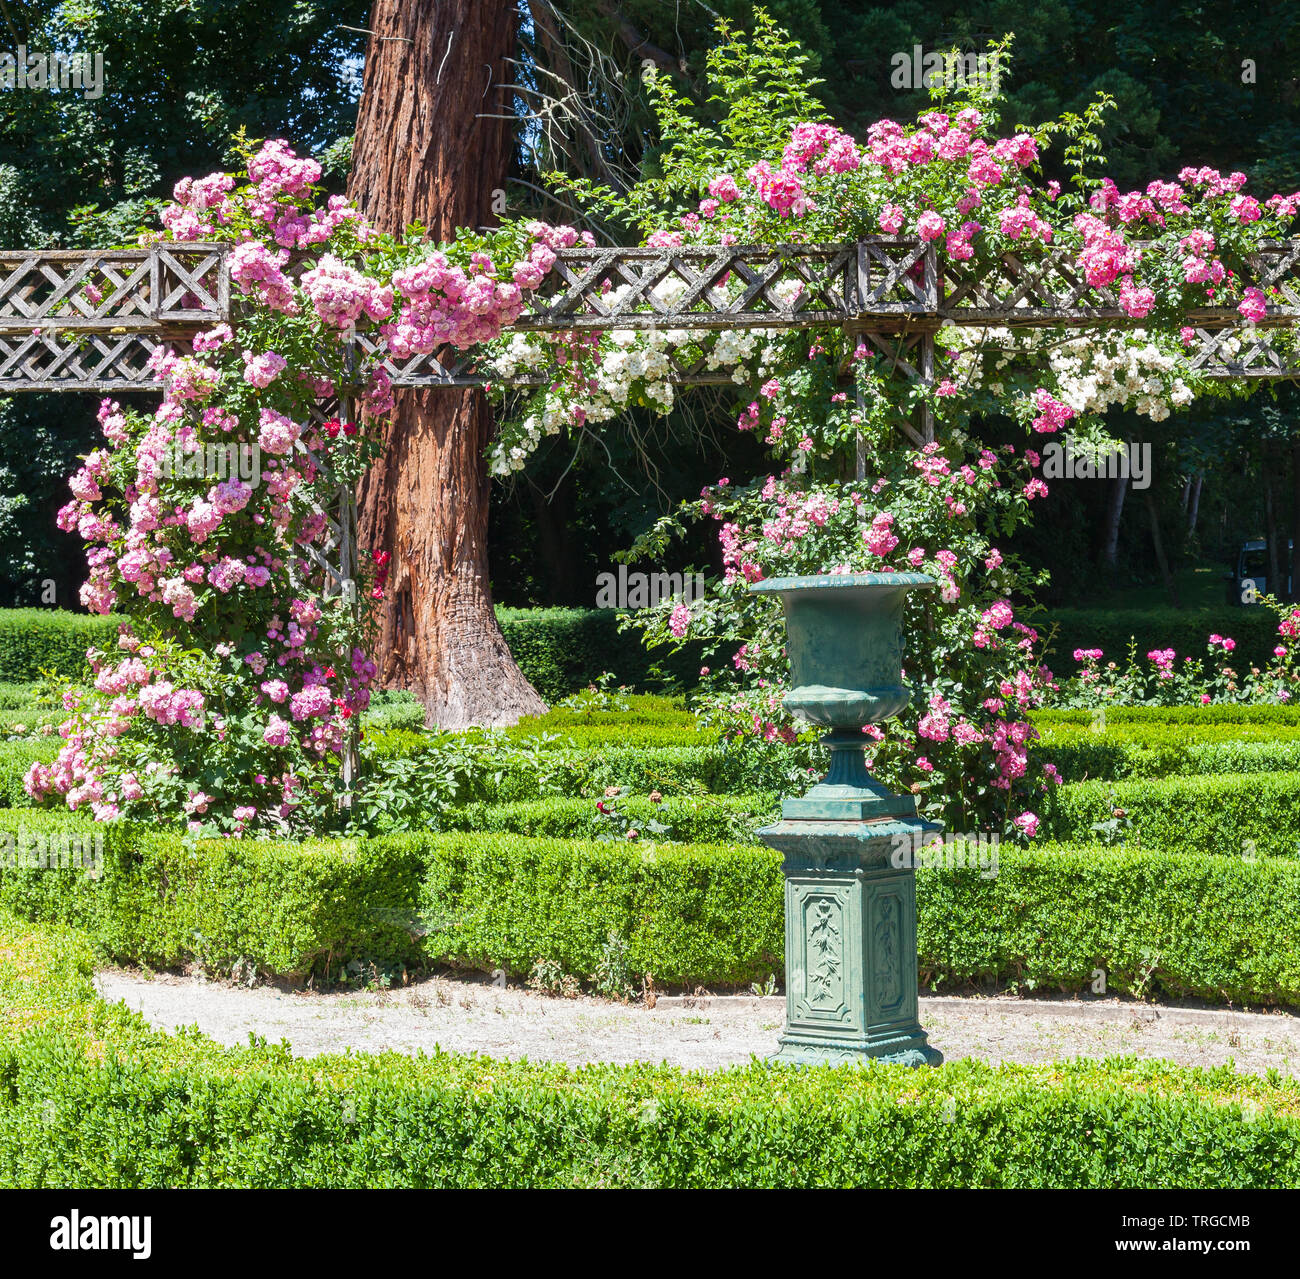 Public rose garden in Aubusson , Creuse, Nouvelle-Aquitaine, France with trellised climbing rose and historic urn Stock Photo